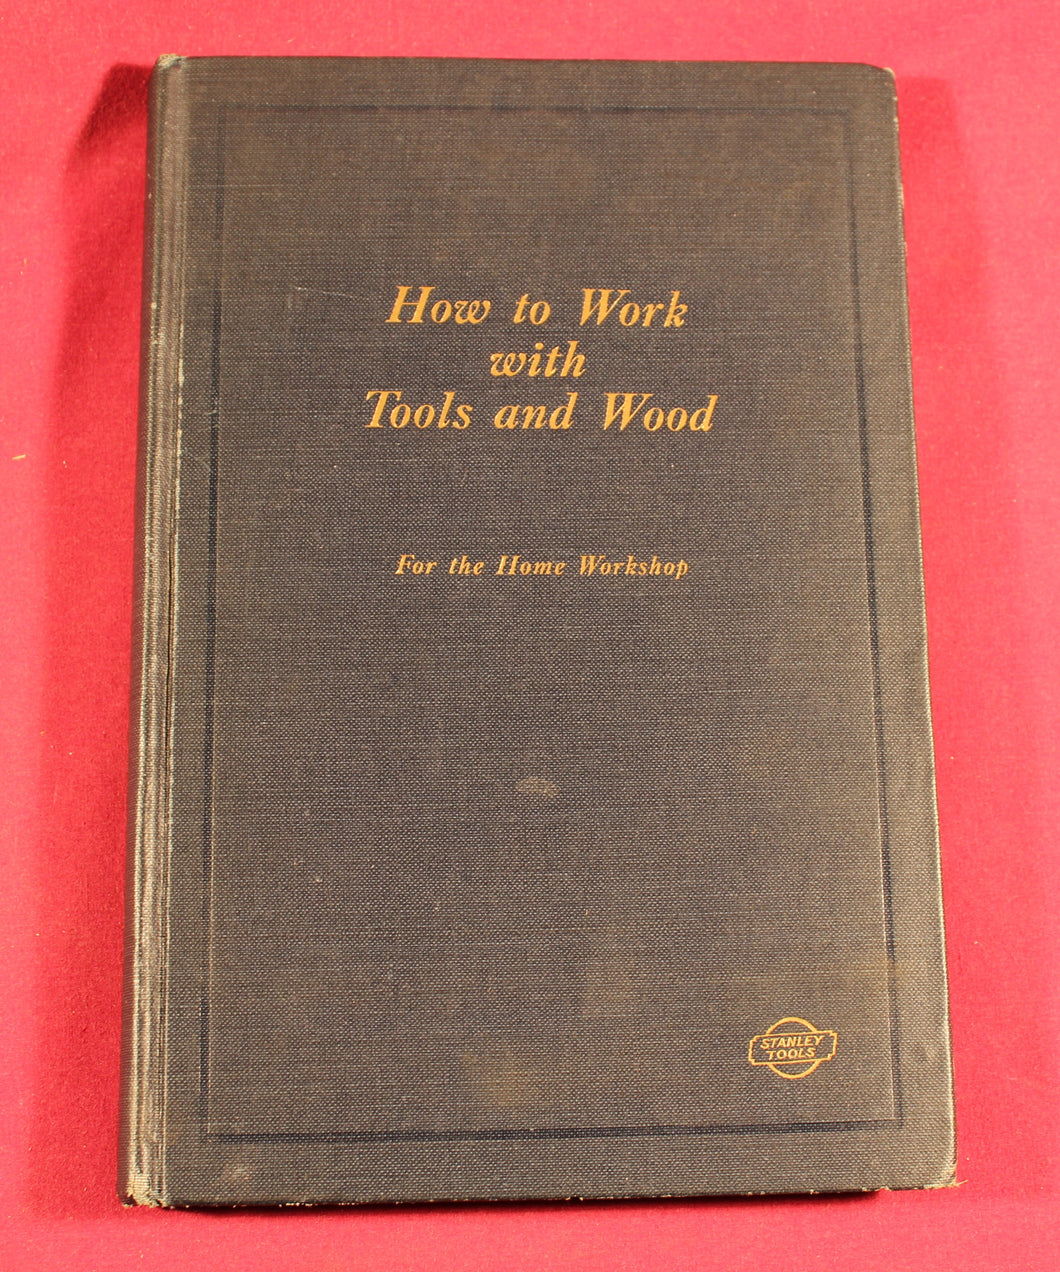 Vintage Stanley Book “How to Work with Tools and Wood” Stanley Tools 1927